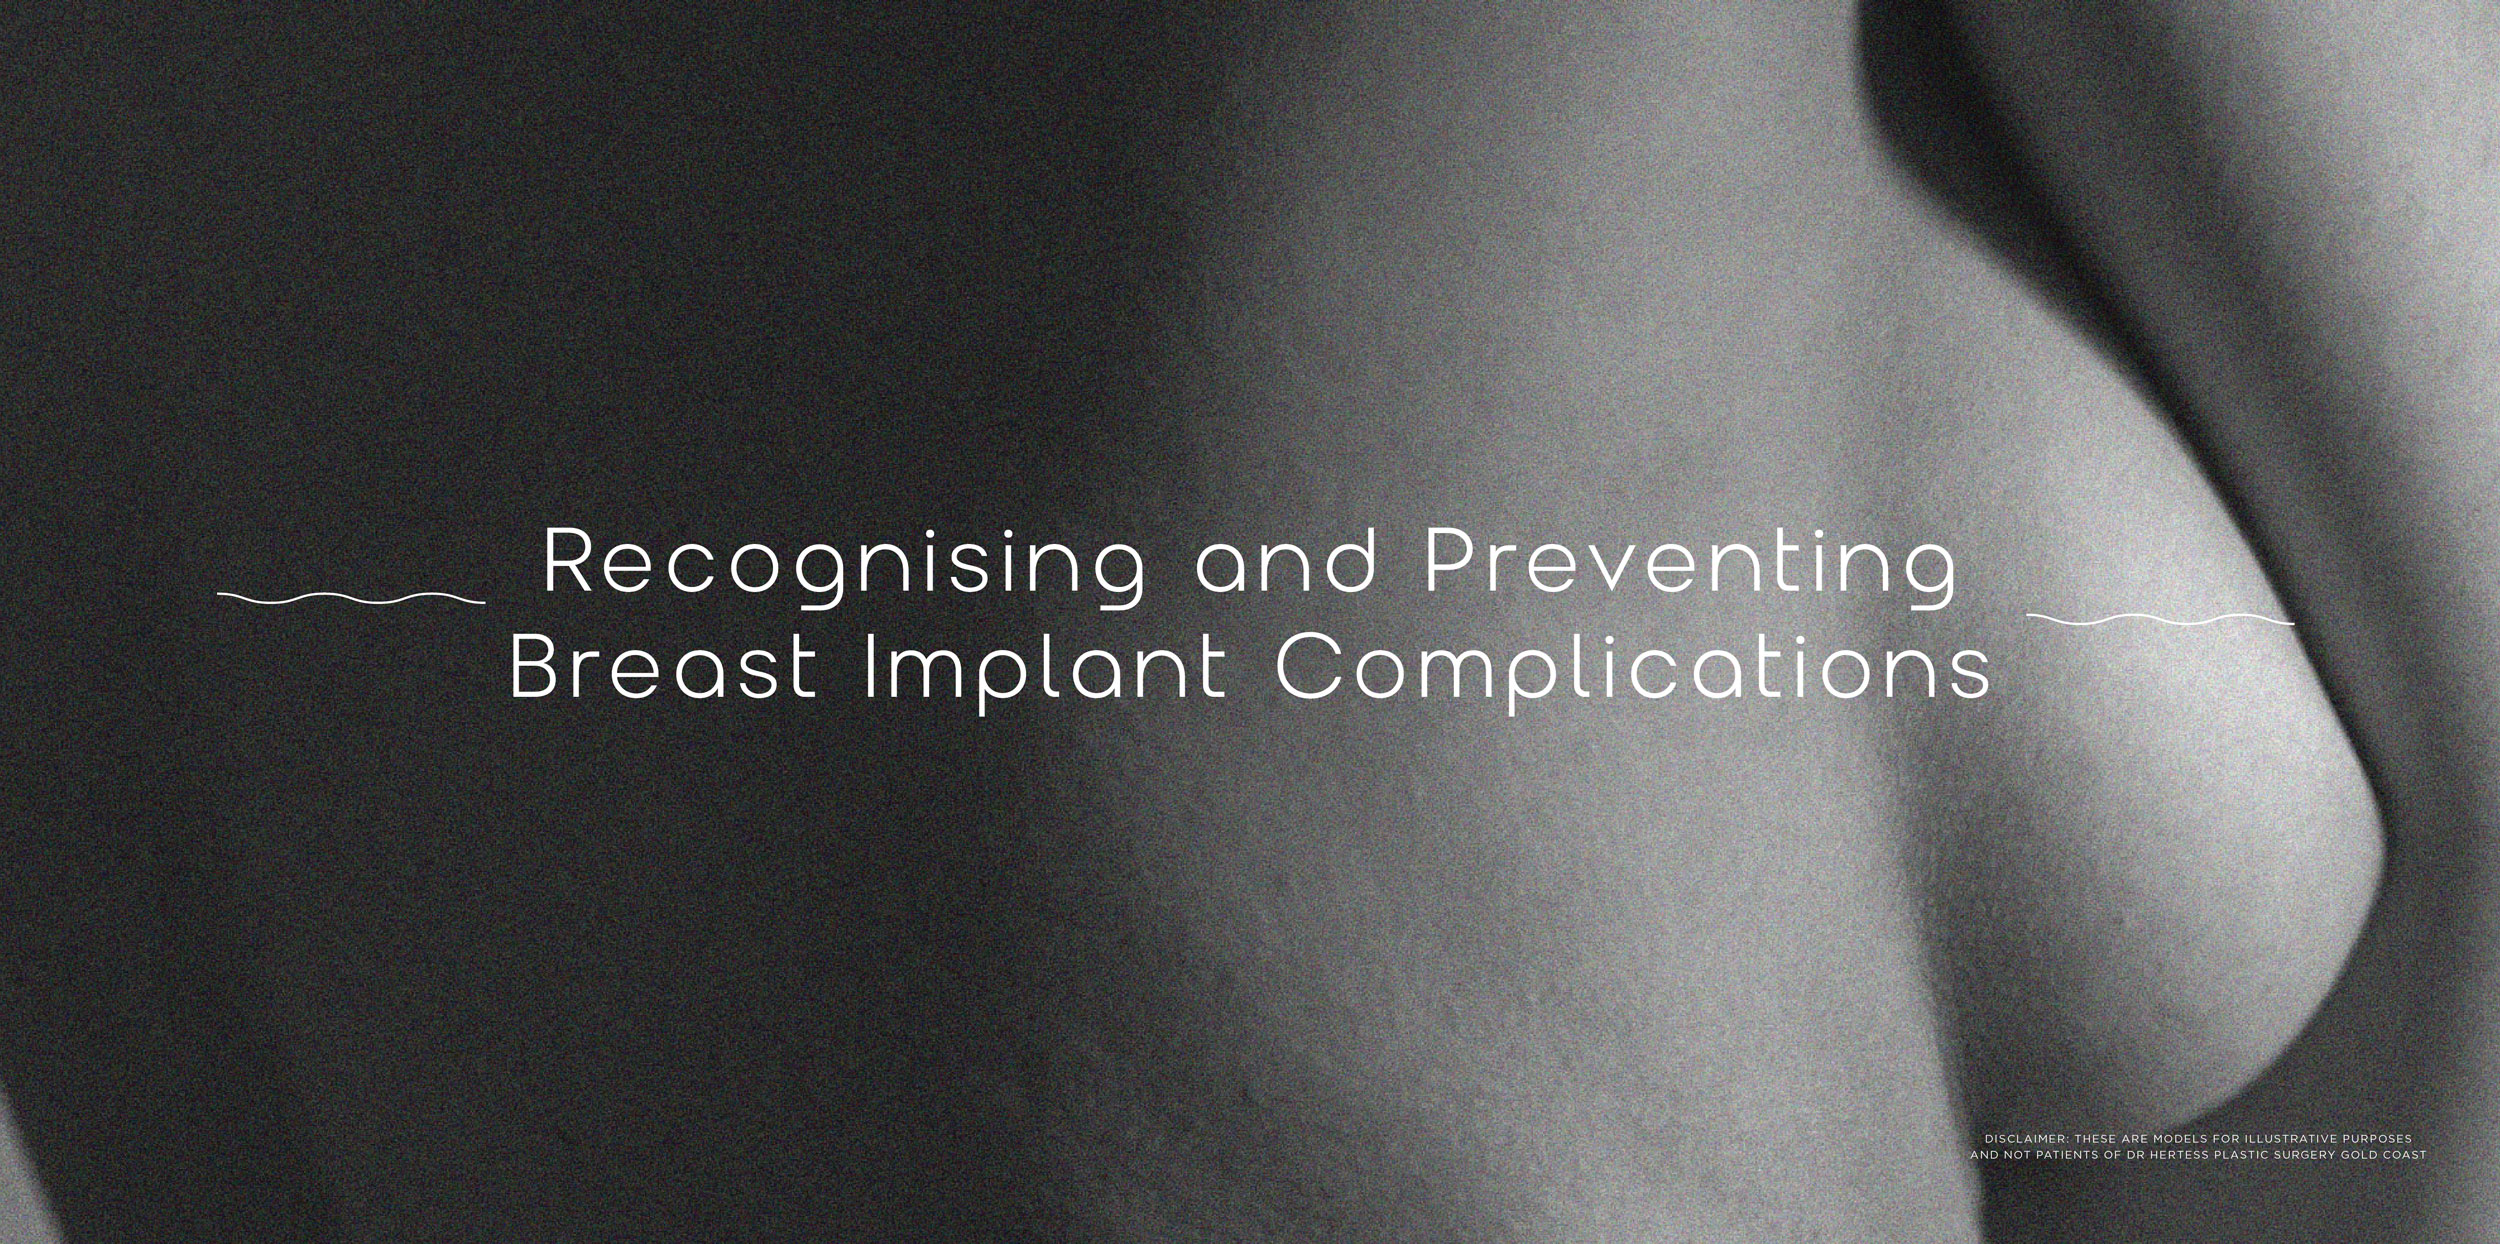 Recognising and Preventing Breast Implant Complications